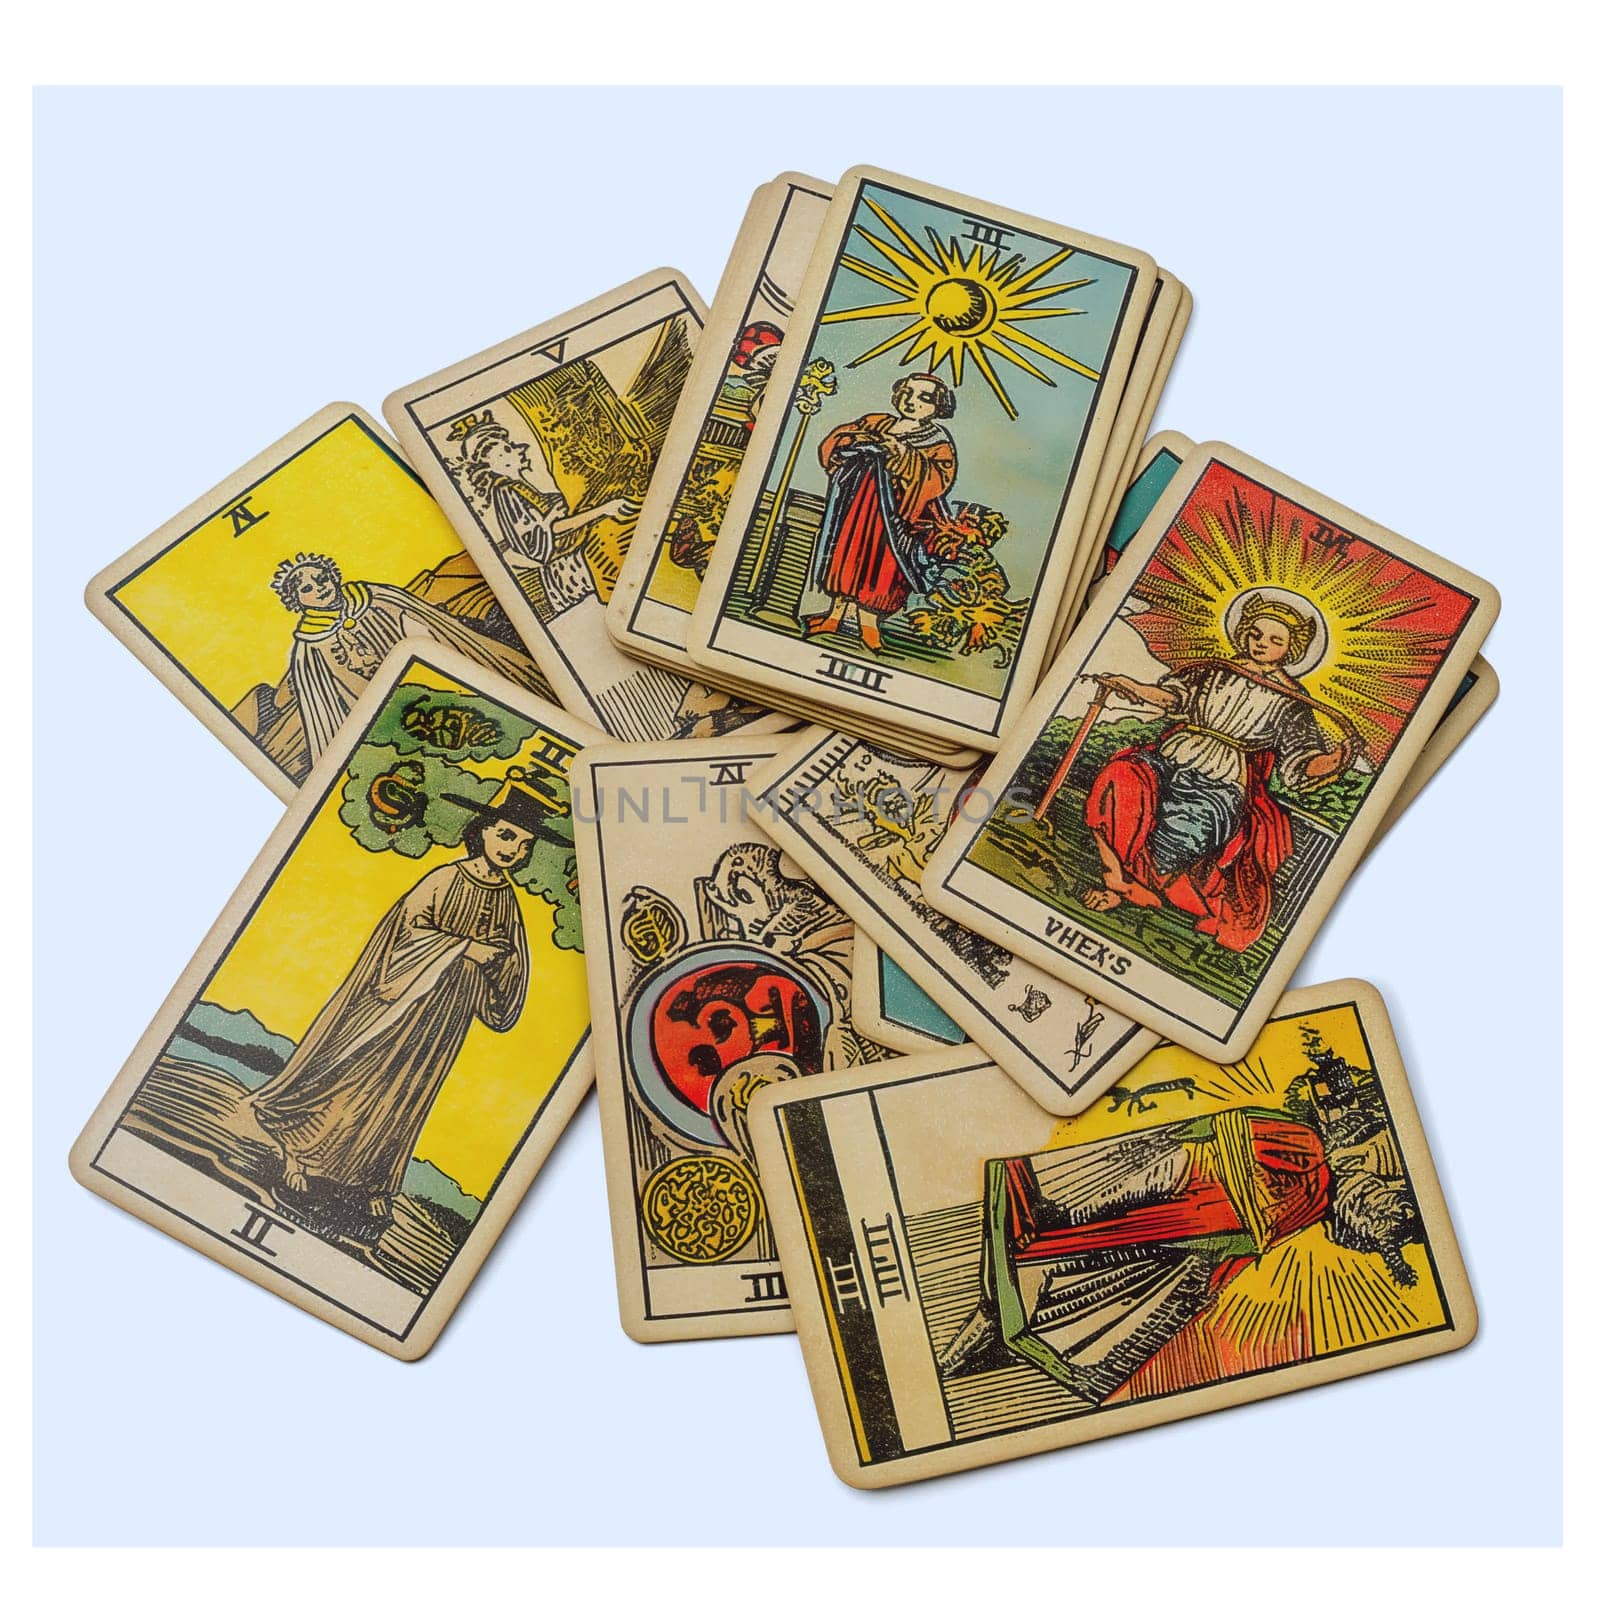 Cut out faded photo of halloween tarot cards by Dustick